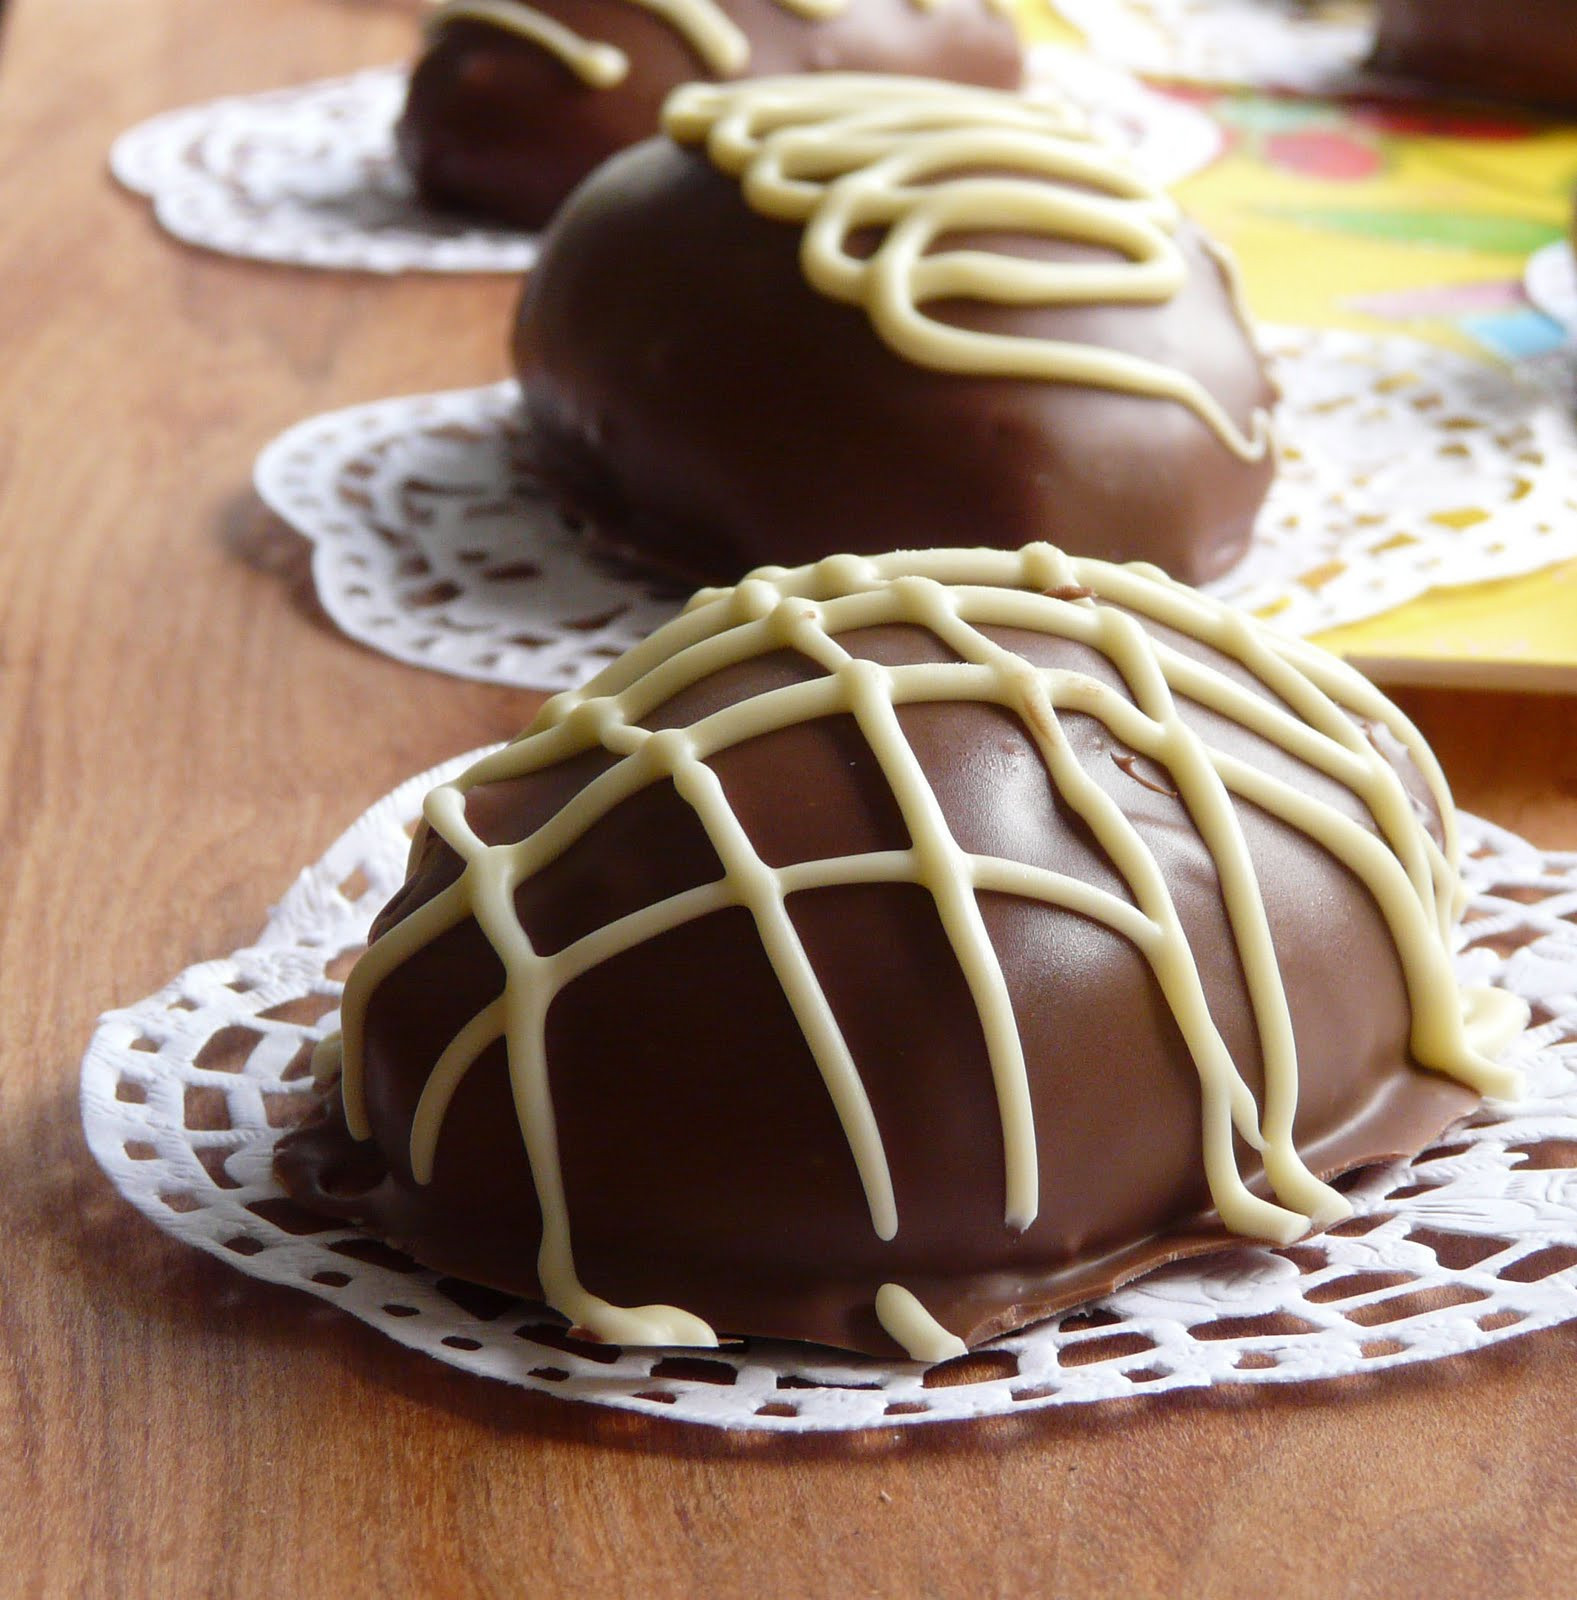 Chocolate Easter Egg Recipe
 Thibeault s Table Happy Easter